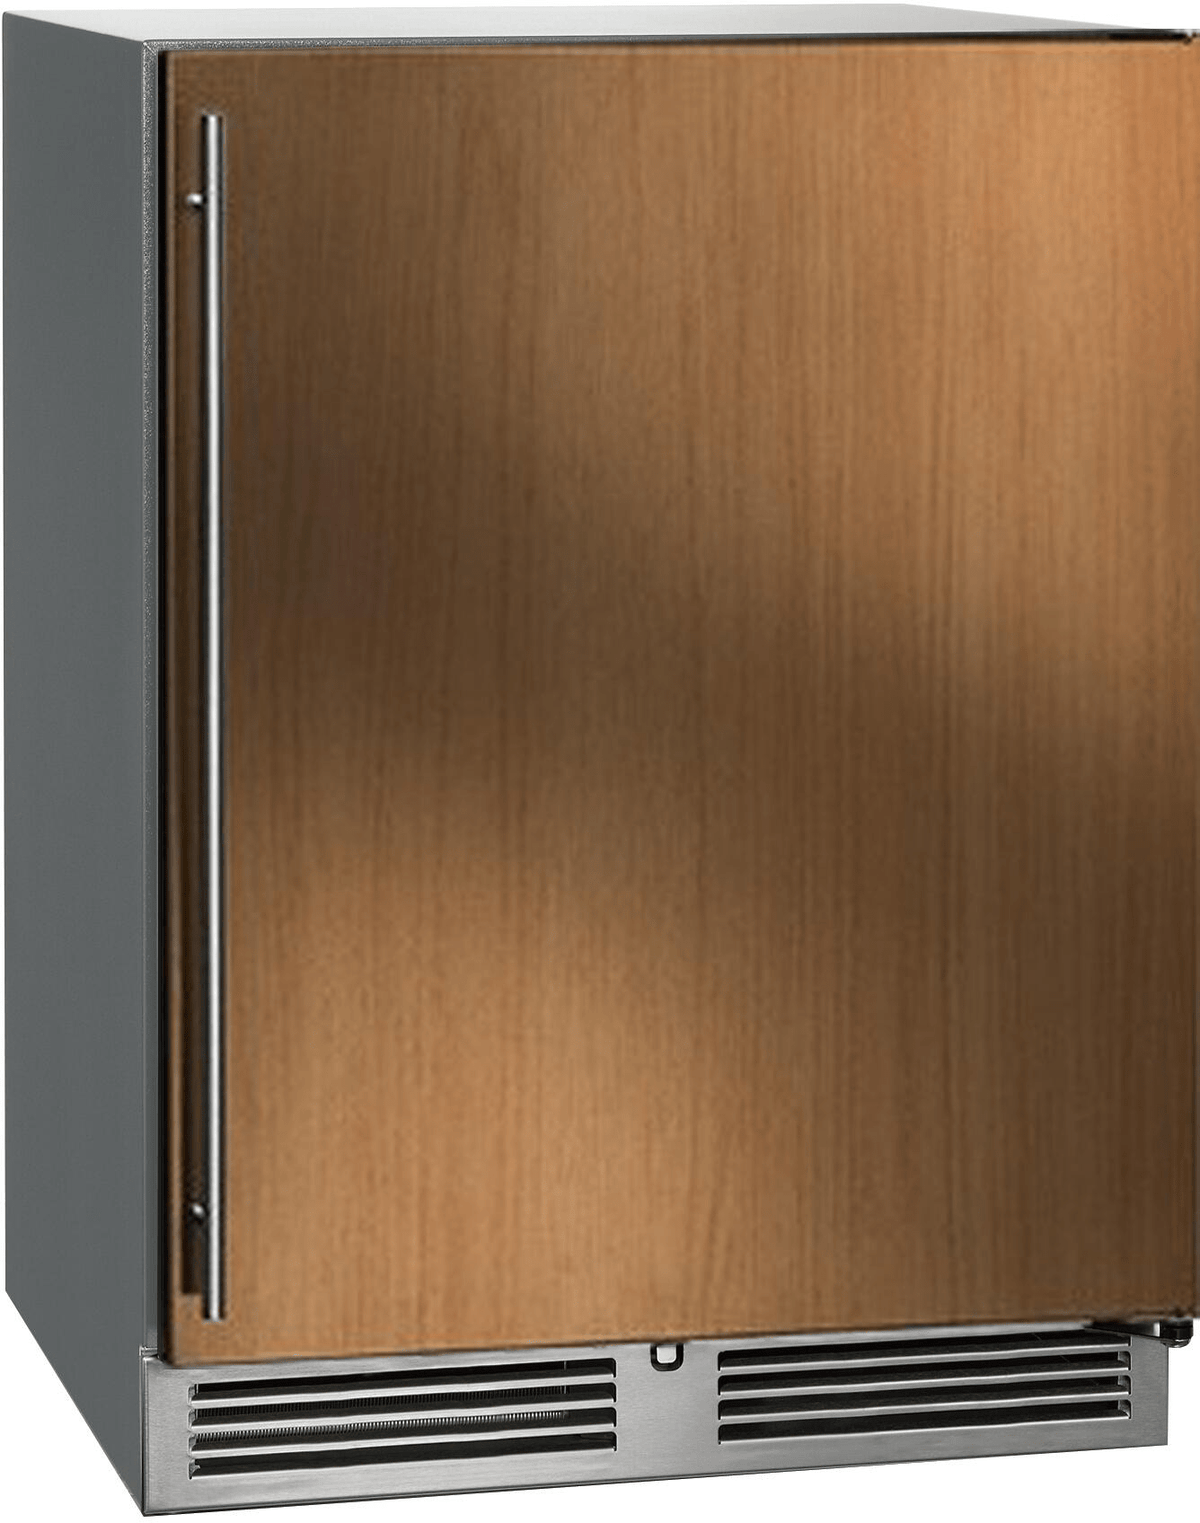 Perlick Refrigeration + Cooling Panel Ready Glass Door - Right Hinge Perlick 24&quot; C-Series Built-In Outdoor Refrigerator / HC24RO-4